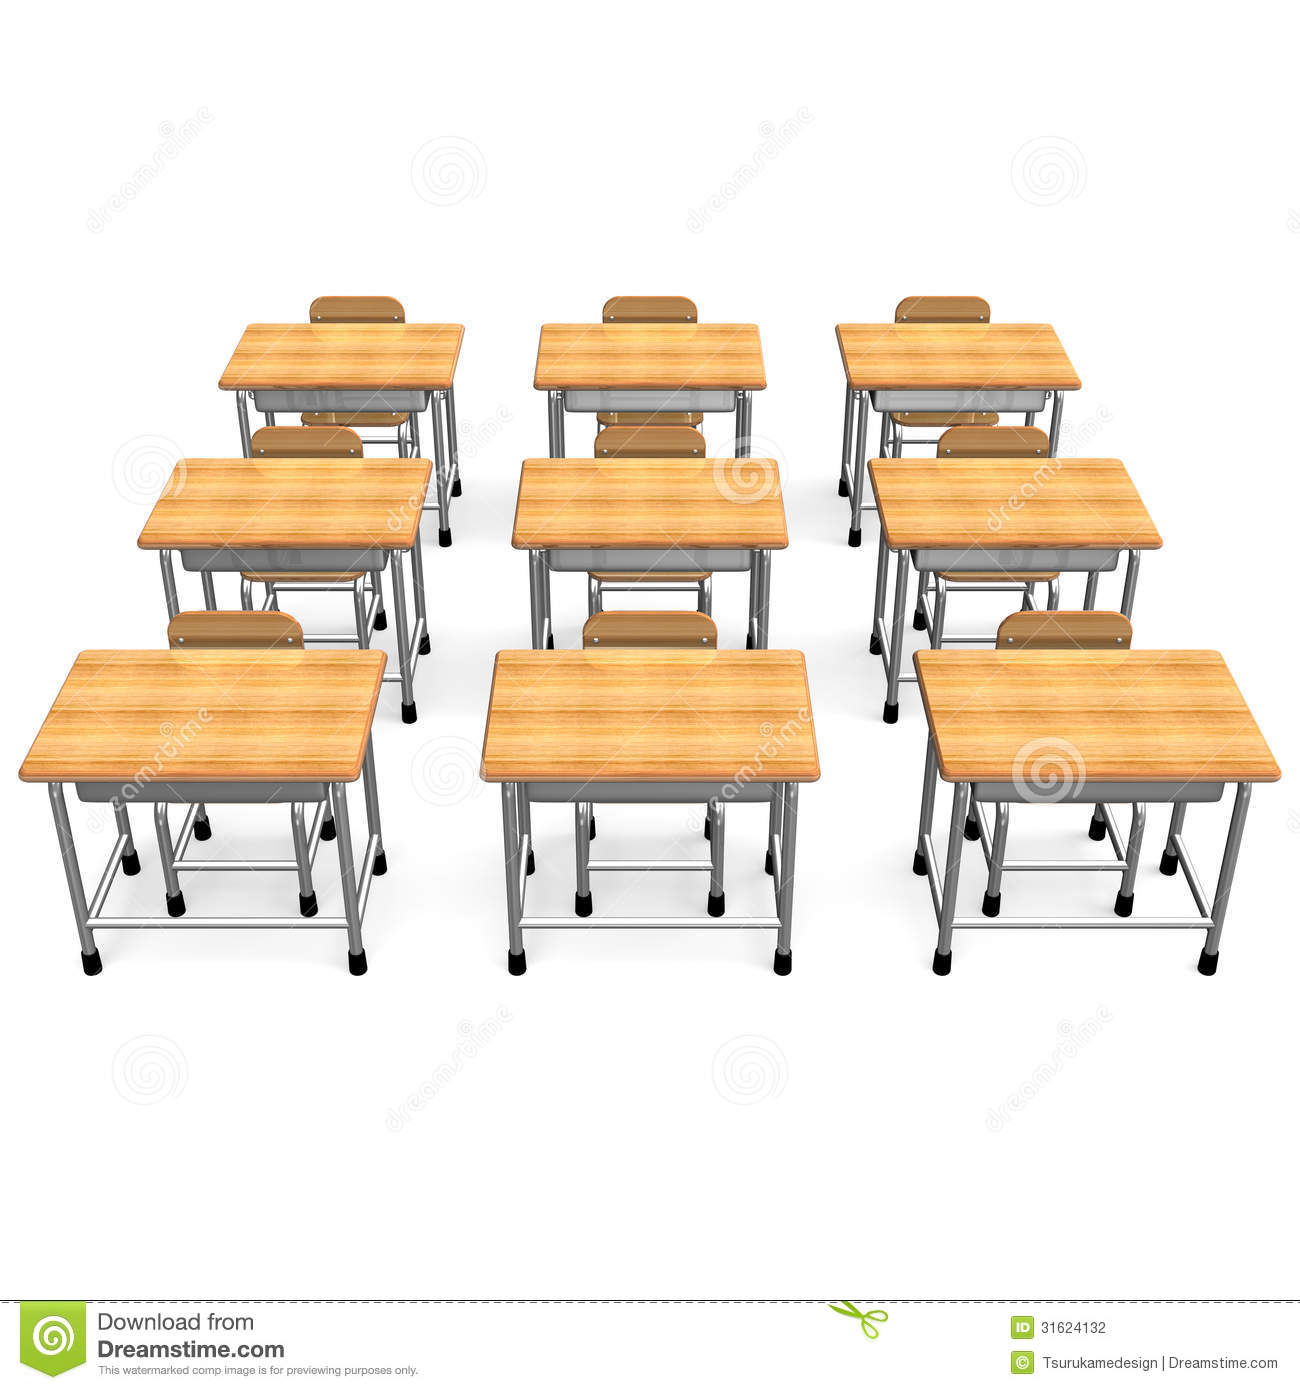 Sdaccs50 School Desk And Chair Clipart School Big Pictures Hd